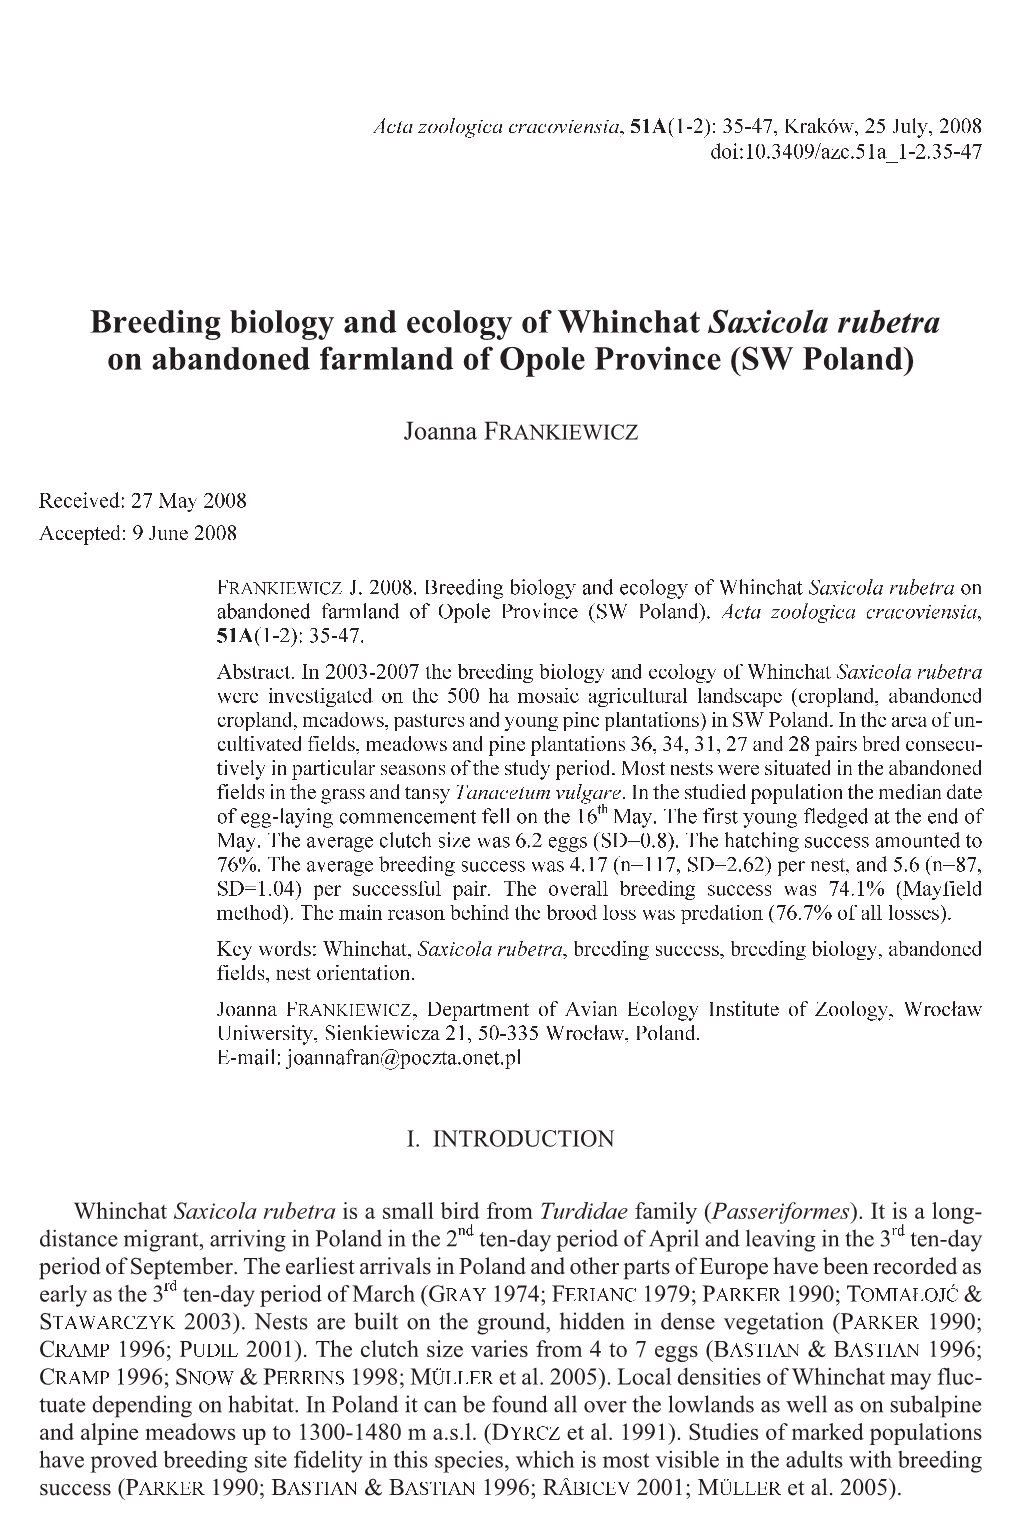 Breeding Biology and Ecology of Whinchat &lt;I&gt;Saxicola Rubetra&lt;/I&gt; on Abandoned Farmland of Opole Province (SW Poland)